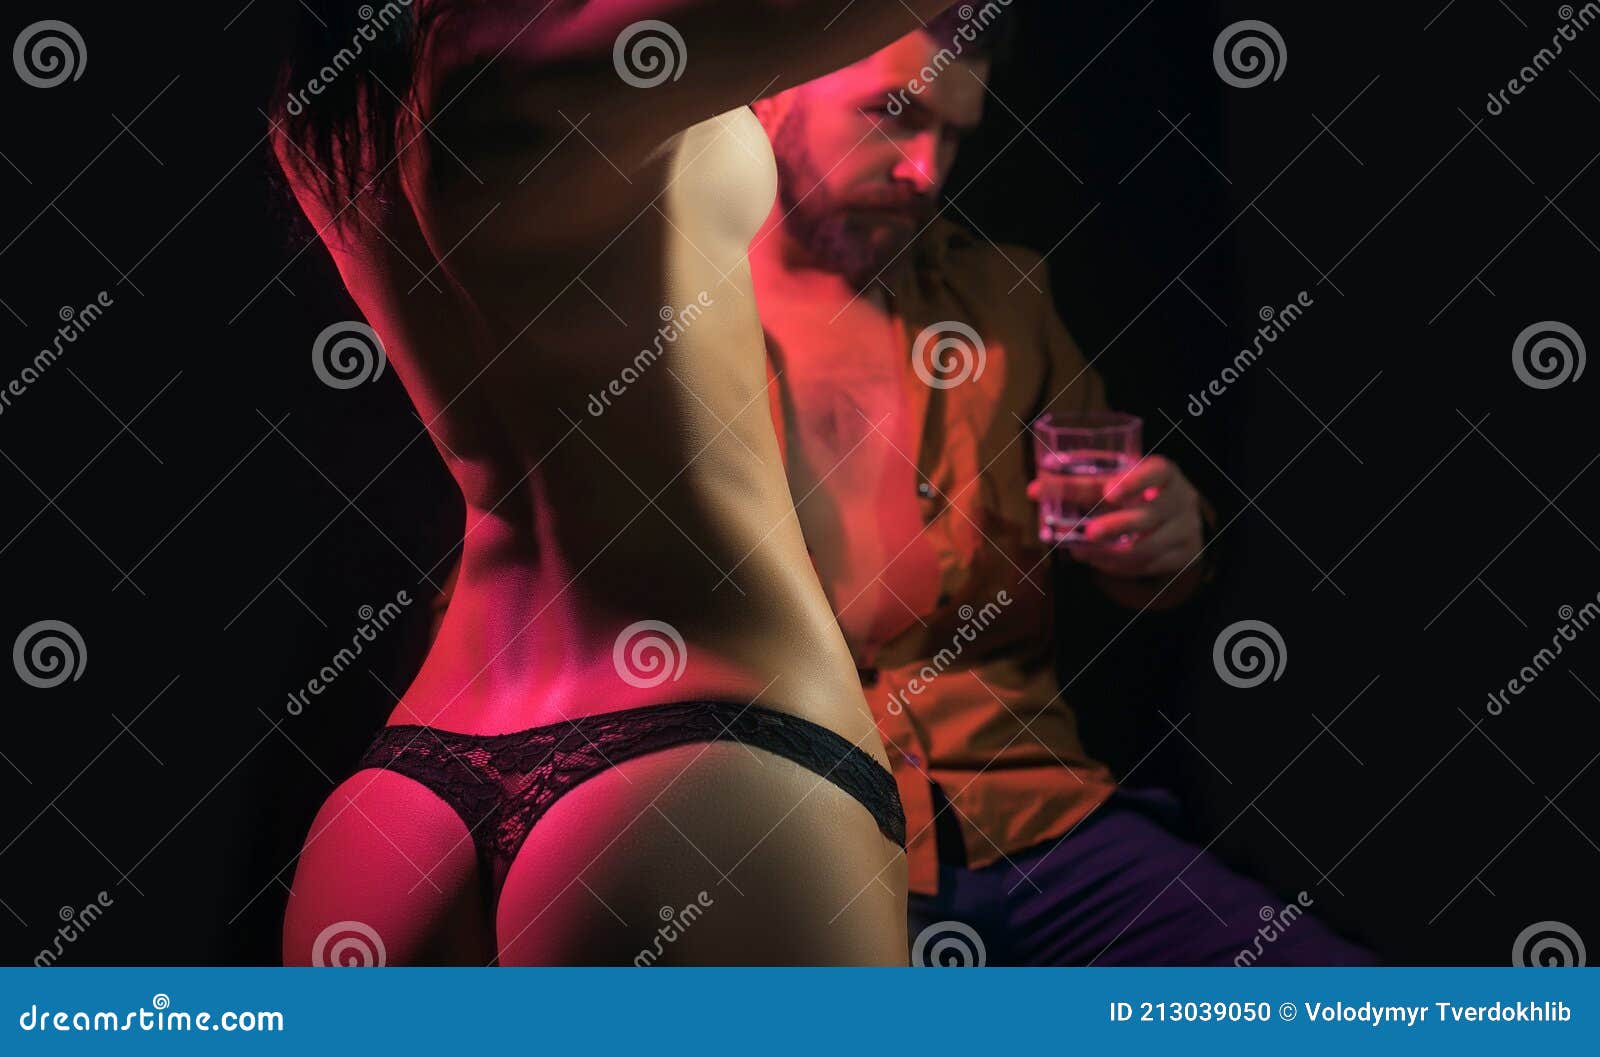 Sex Games, Desire and Foreplay. Man Drink Whiskey, Naked Woman. Couple in Love Relax image image